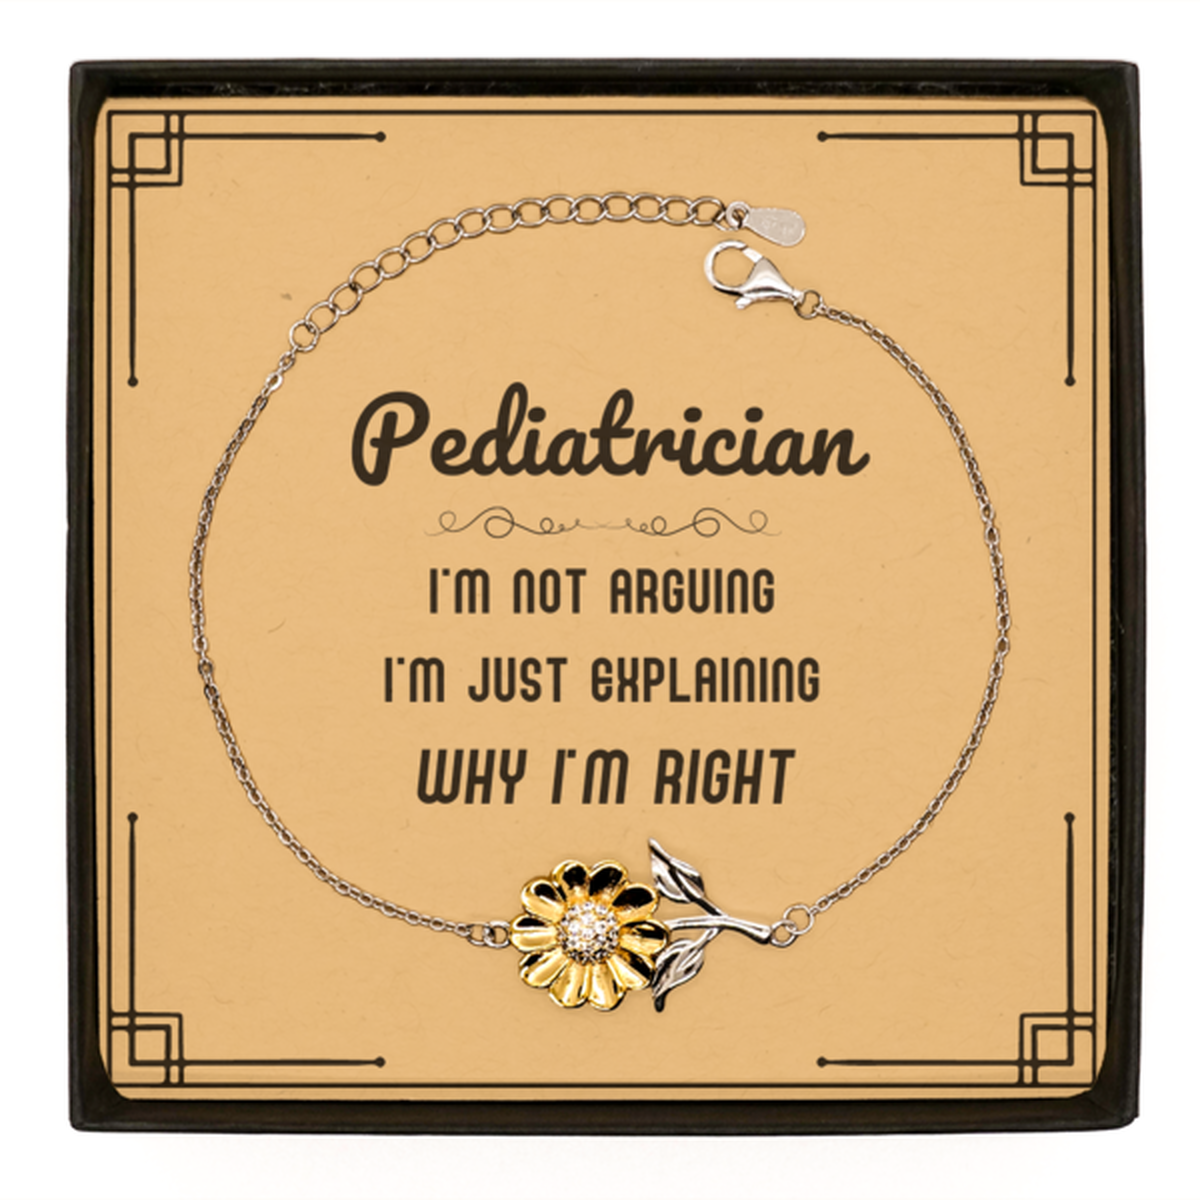 Pediatrician I'm not Arguing. I'm Just Explaining Why I'm RIGHT Sunflower Bracelet, Funny Saying Quote Pediatrician Gifts For Pediatrician Message Card Graduation Birthday Christmas Gifts for Men Women Coworker